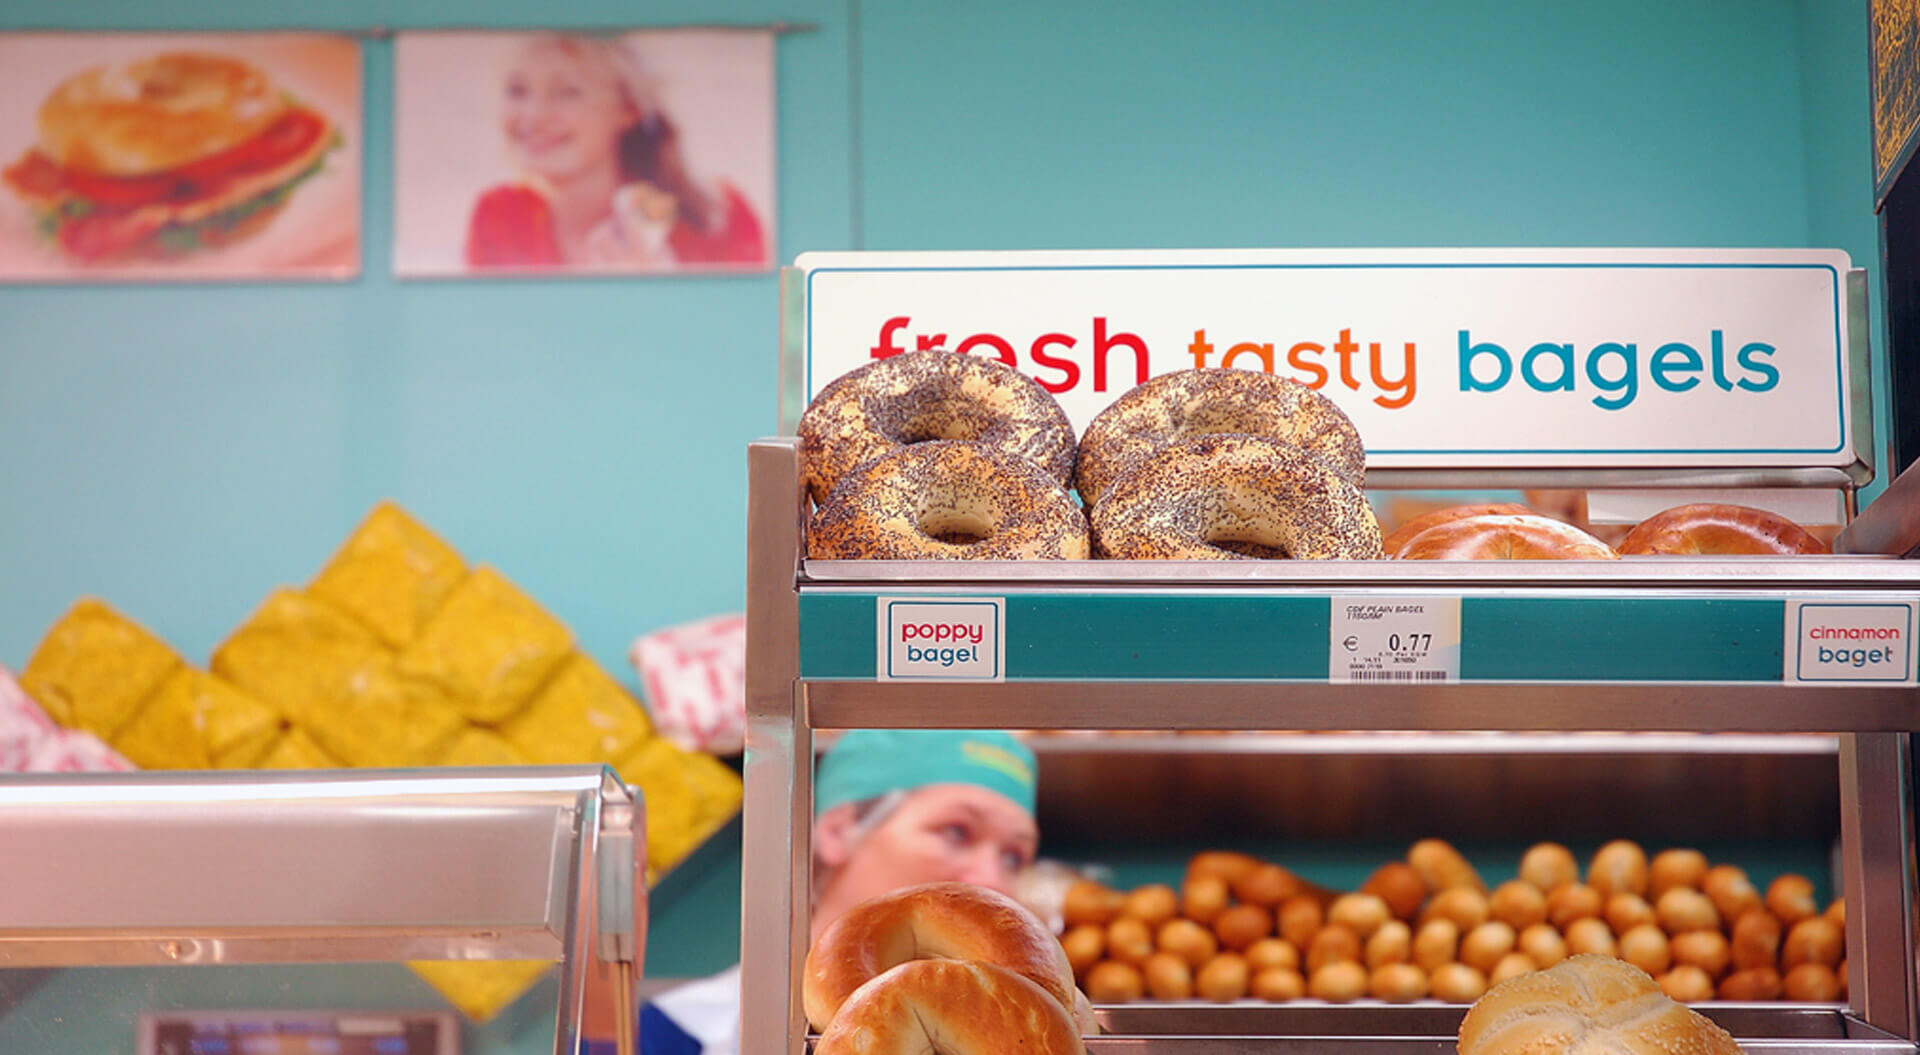 Centra conveince stores in-store freshly baked branding and merchandising